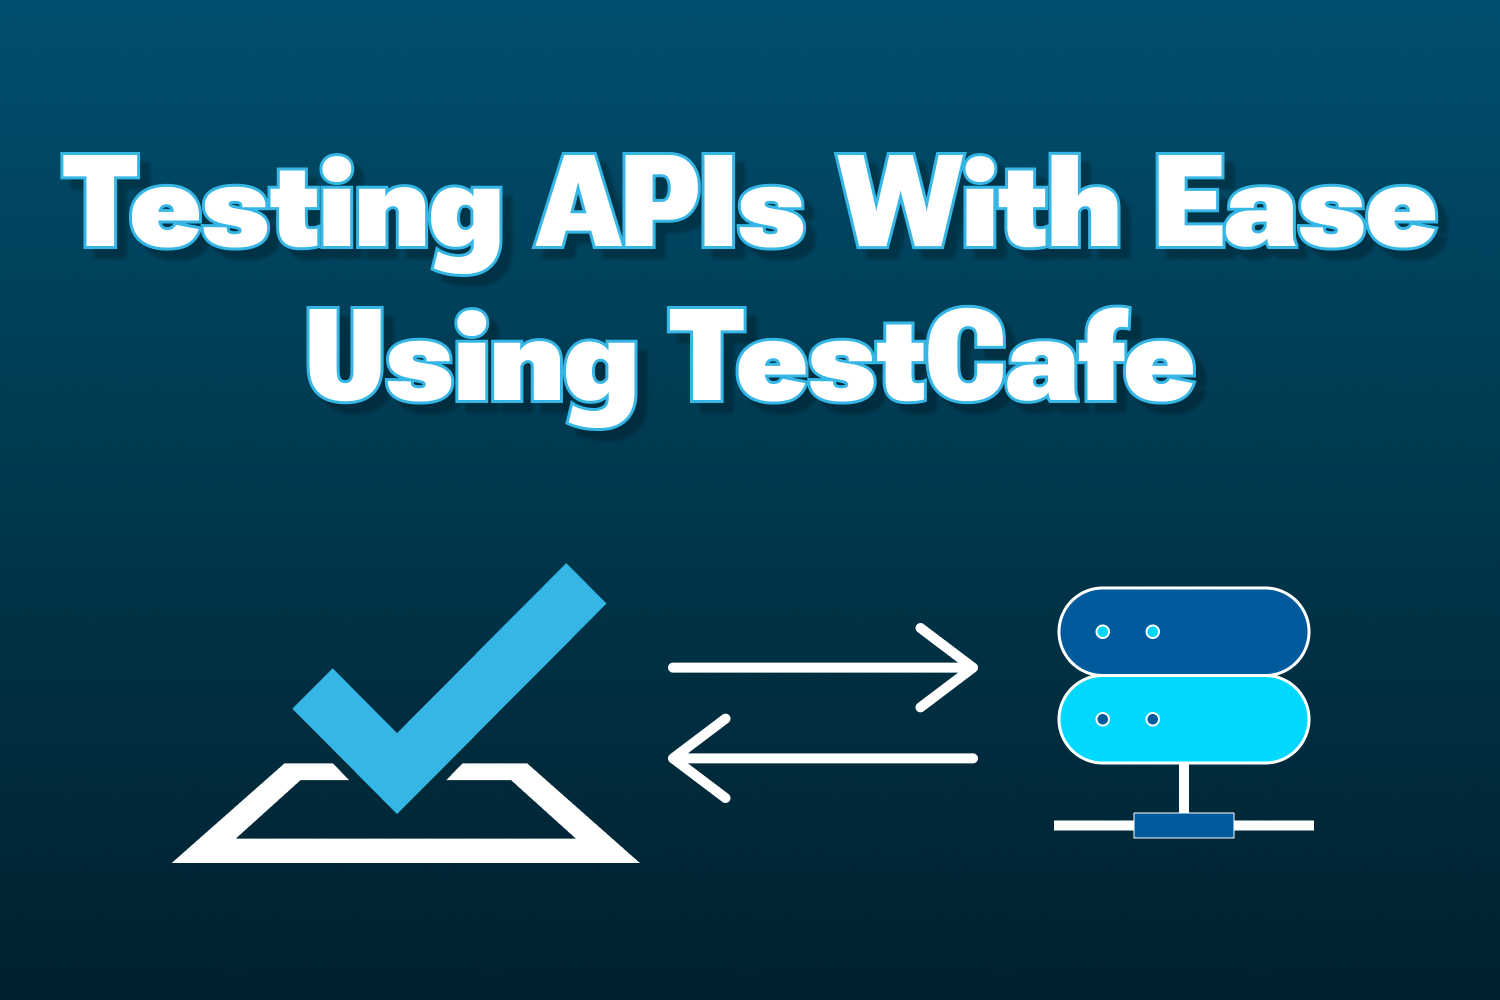 Testing APIs With Ease Using TestCafe